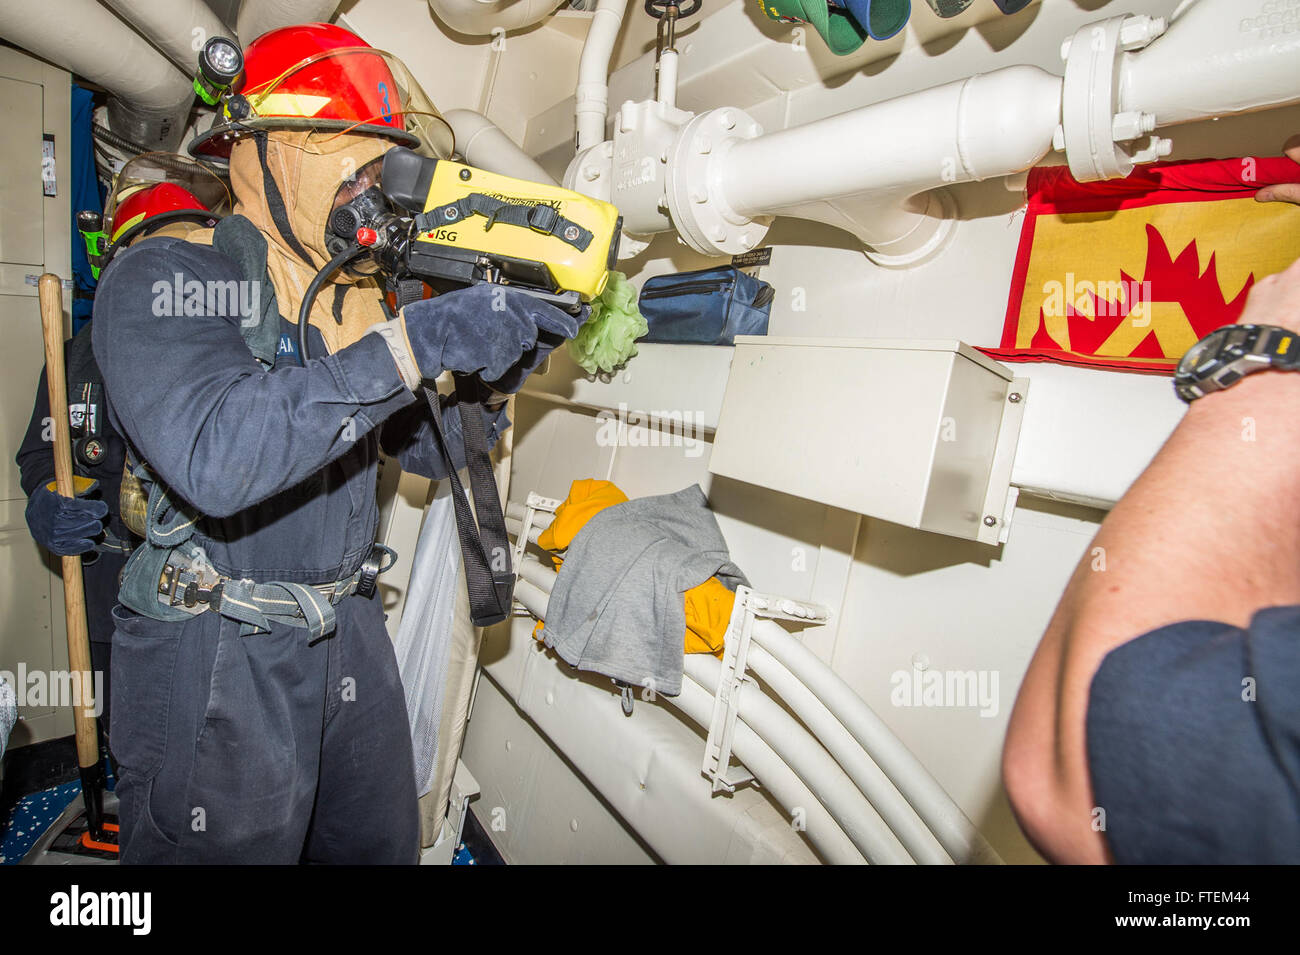 ATLANTIC OCEAN (Feb. 21, 2015) Damage Controlman Fireman Mark Williams, from Macon, Georgia, uses a Navy firefighter thermal imager during a fire drill aboard USS Laboon (DDG 58) Feb. 21, 2015. Laboon, an Arleigh Burke-class guided-missile destroyer, homeported in Norfolk, is conducting naval operations in the U.S. 6th Fleet area of operations in support of U.S. national security interests in Europe. Stock Photo